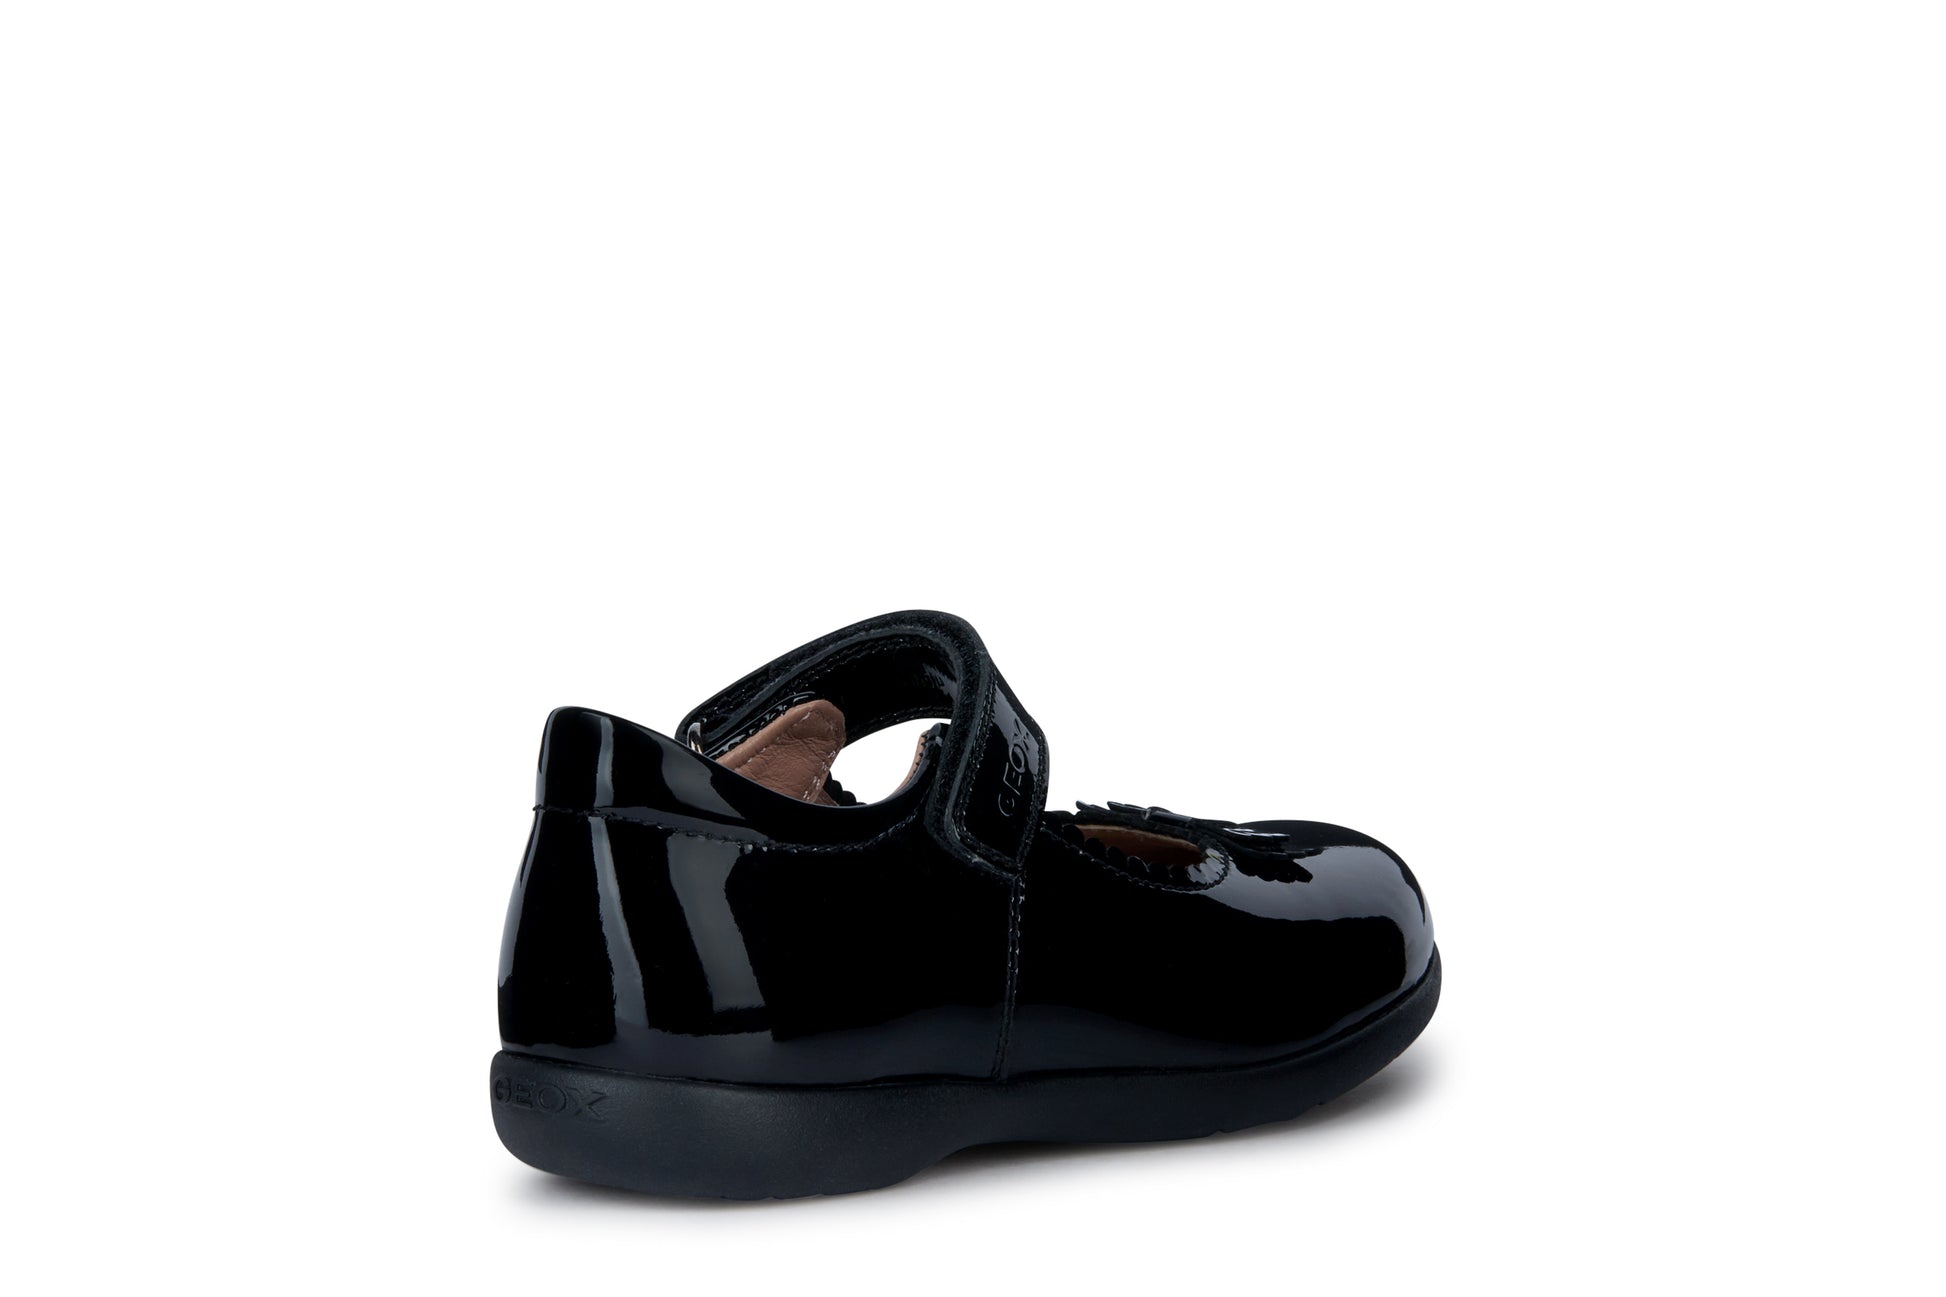 A girls school shoe by Geox, style Naimara in black patent with a velcro strap. Outer rear side angled view